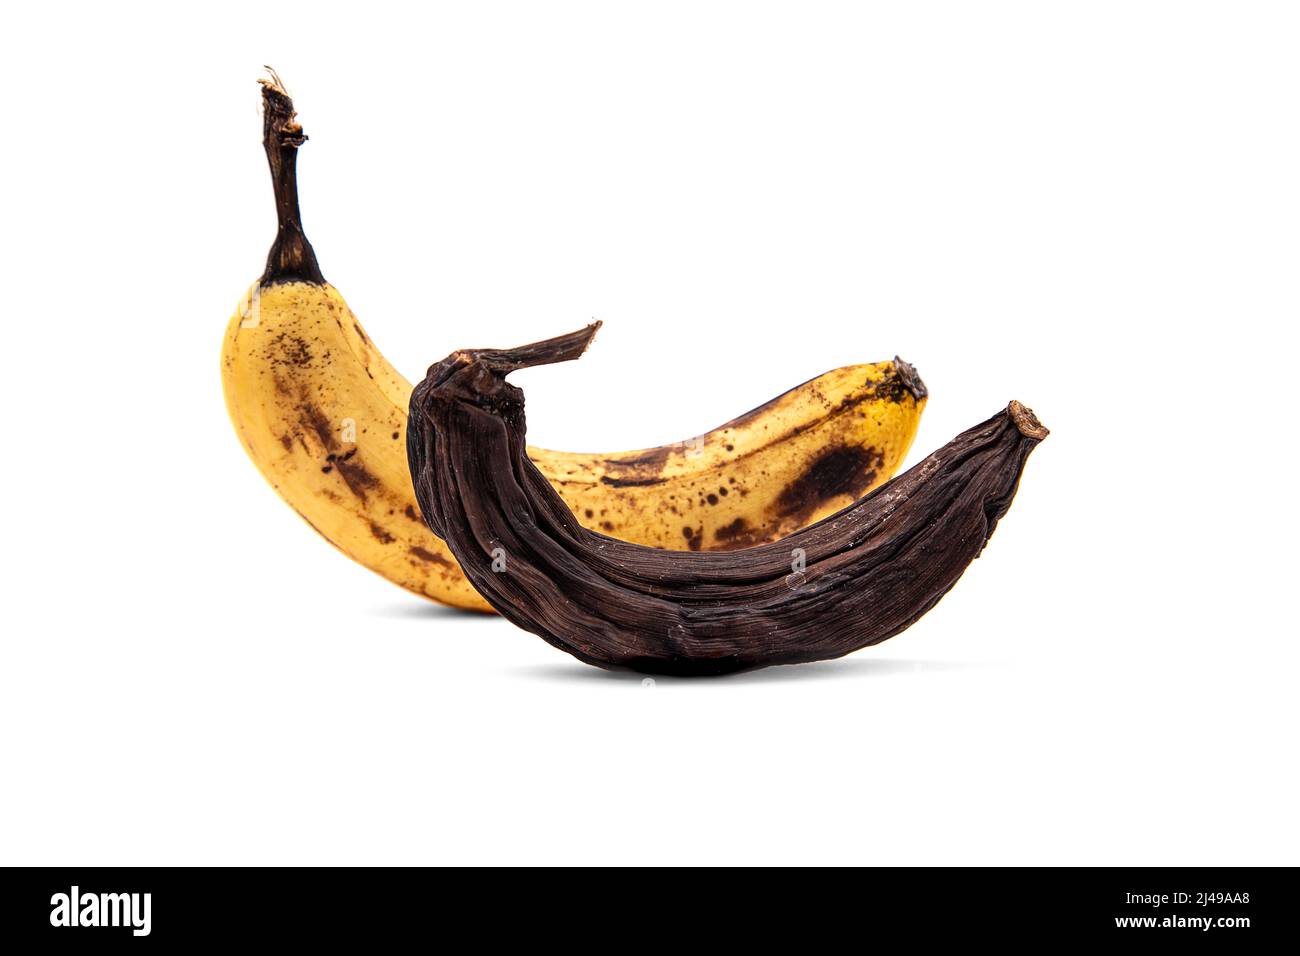 Ripe and dried bananas in the peel isolated on a white background Stock Photo